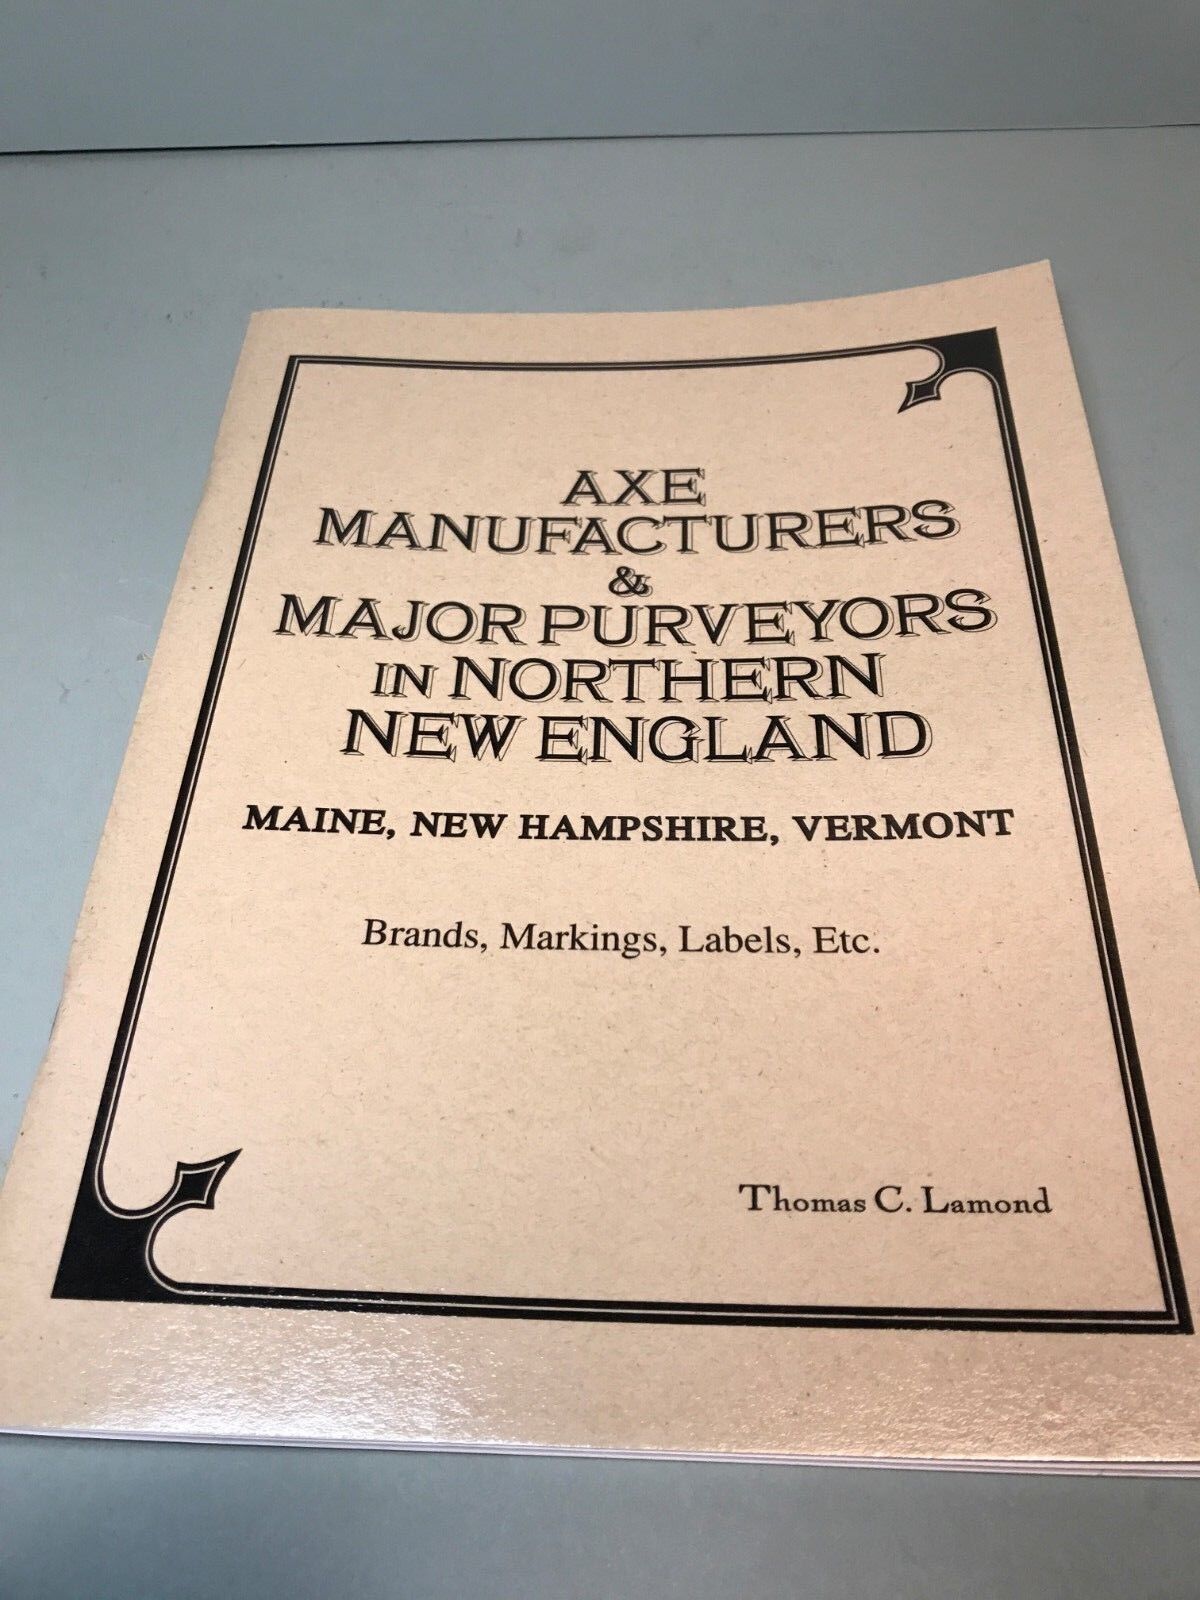 AXE MANUFACTURERS & PURVEYORS IN NORTHERN NEW ENGLAND  BY THOMAS LAMOND